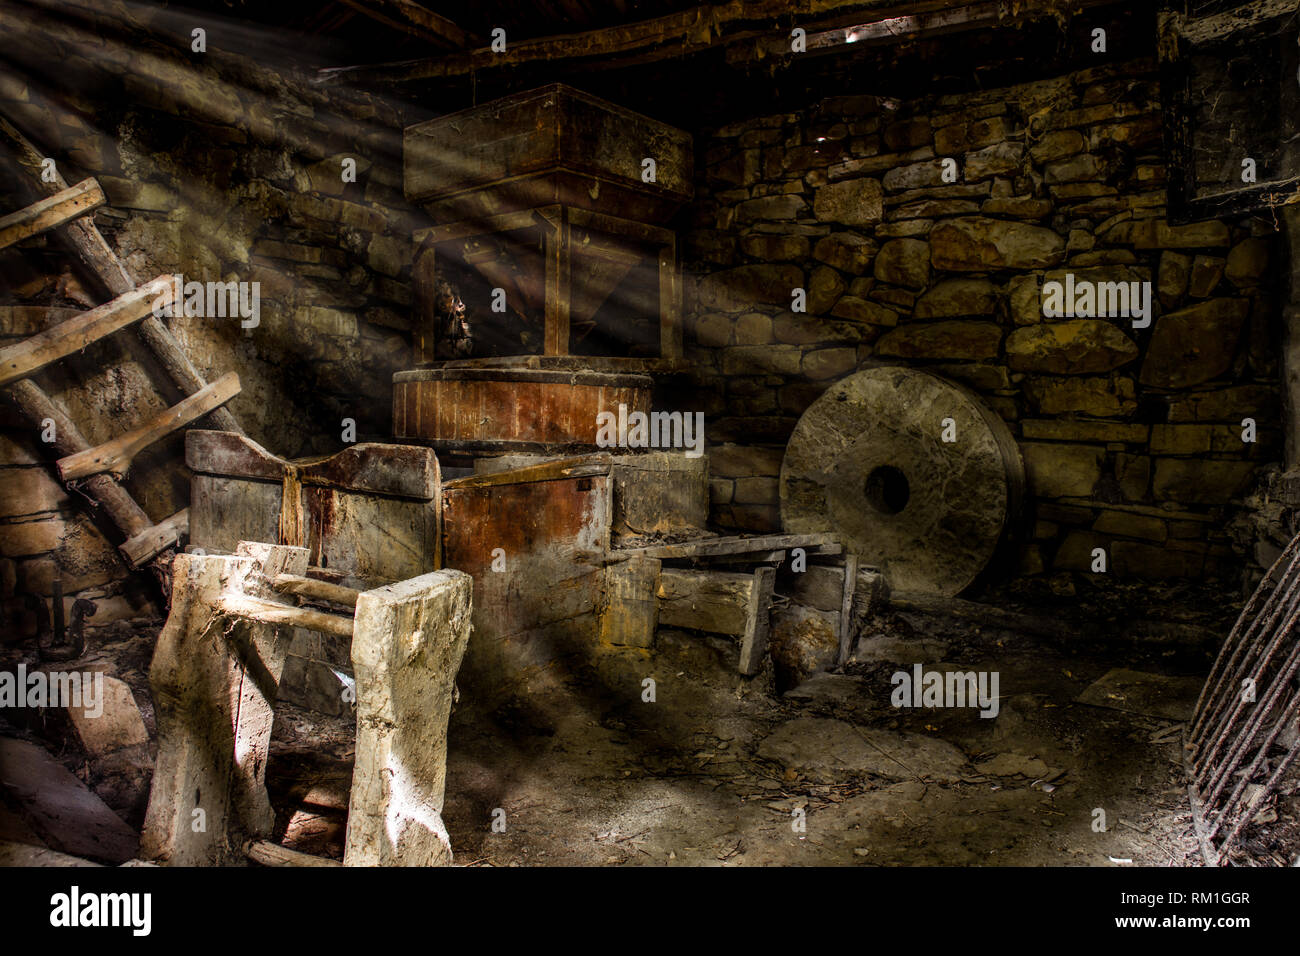 sun rays that pass through the cracks on the roof, and illuminate interiors of old water mill, large circular stone, ladders and etc., long out of use. Stock Photo